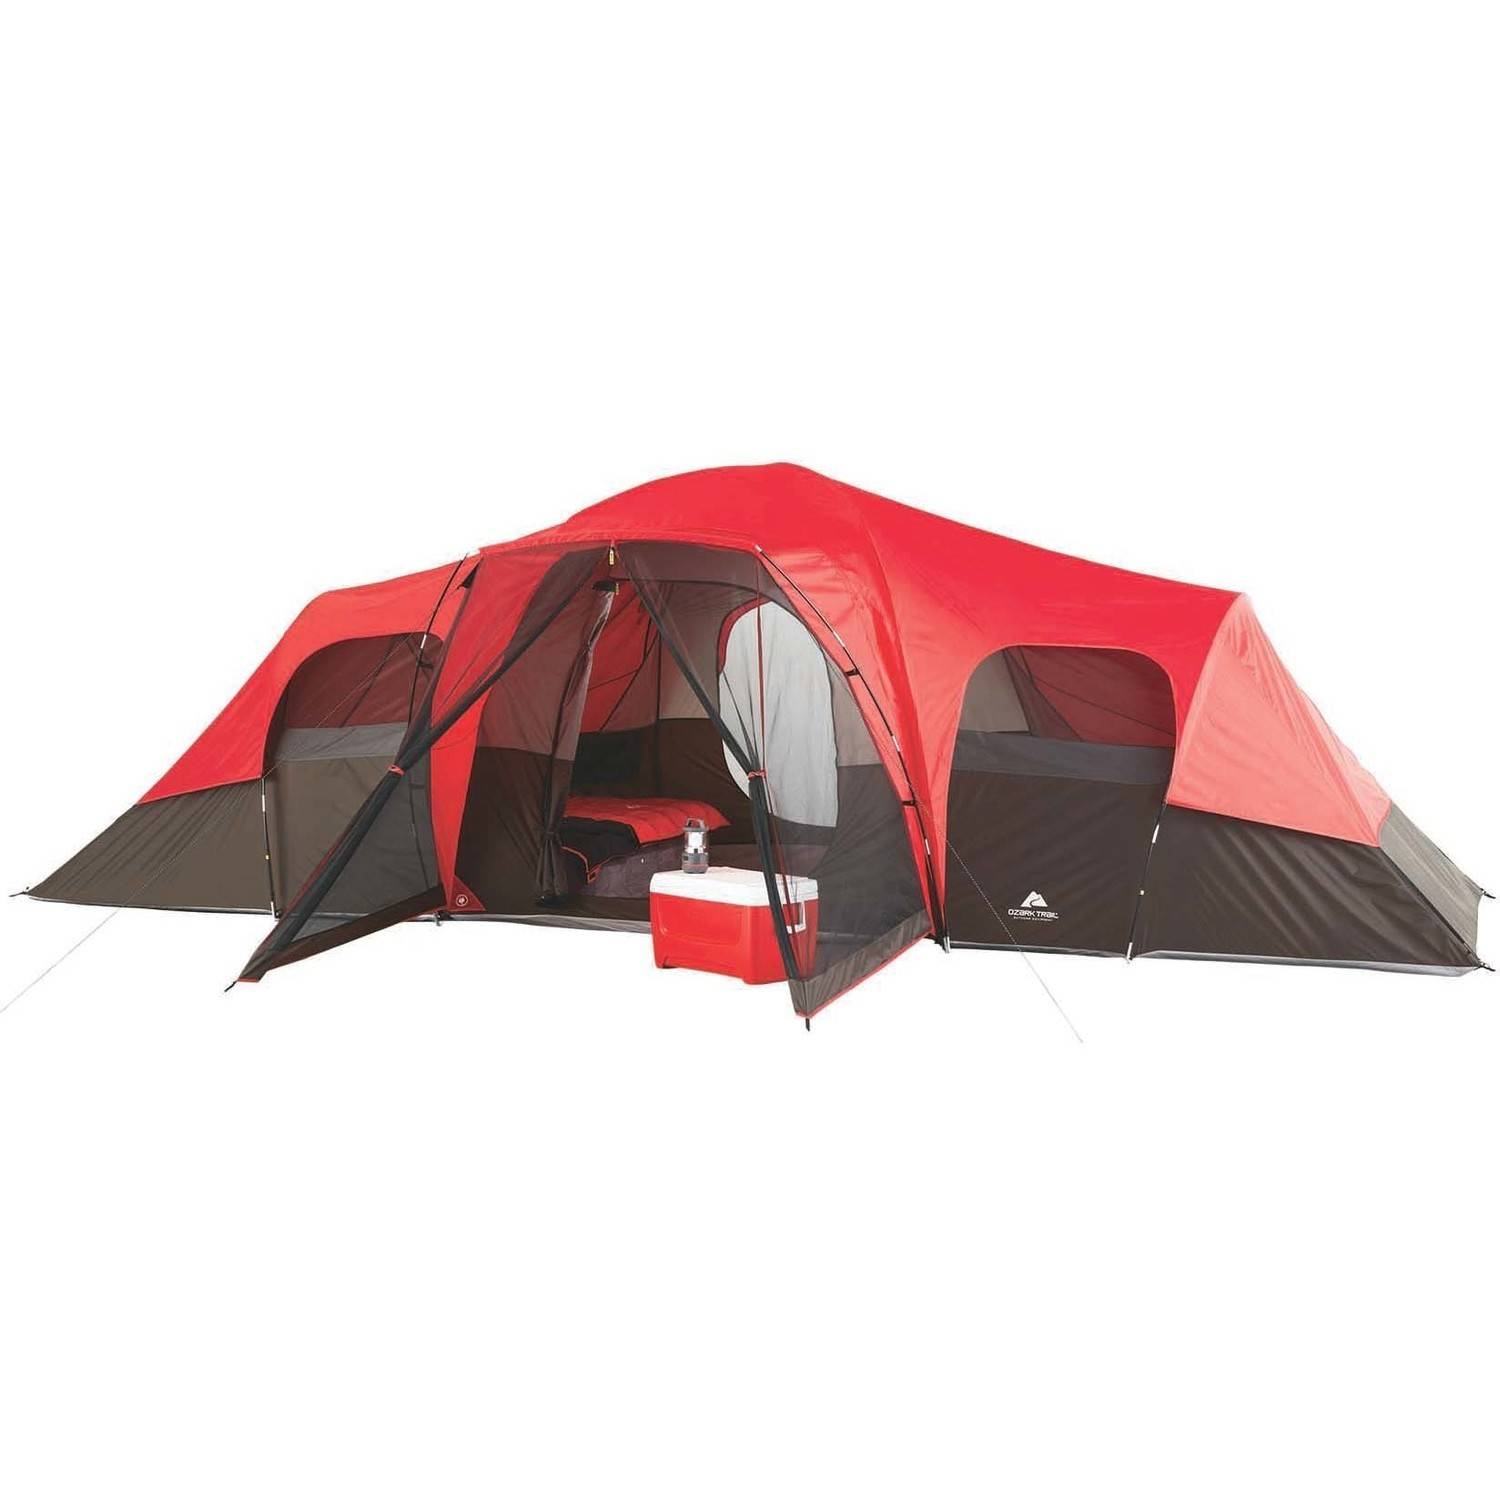 Ozark Trail, 21' x 15’ x 78” 10-Person Family Camping Tent, 26.4 lbs - image 1 of 11